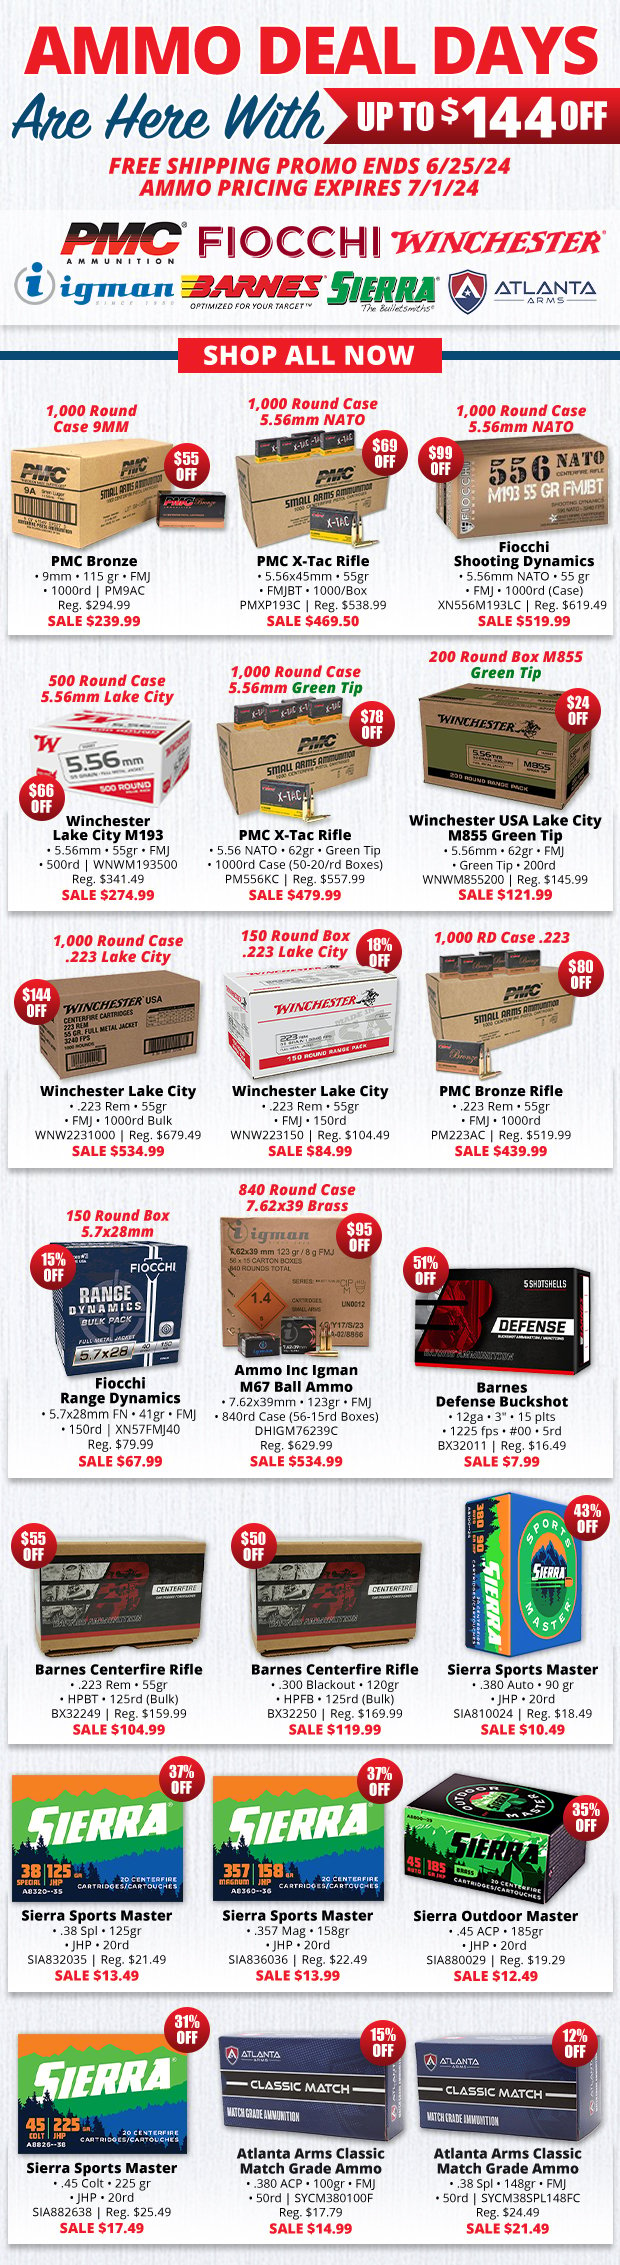 Up to $144 Off on Our Ammo Deal Days!